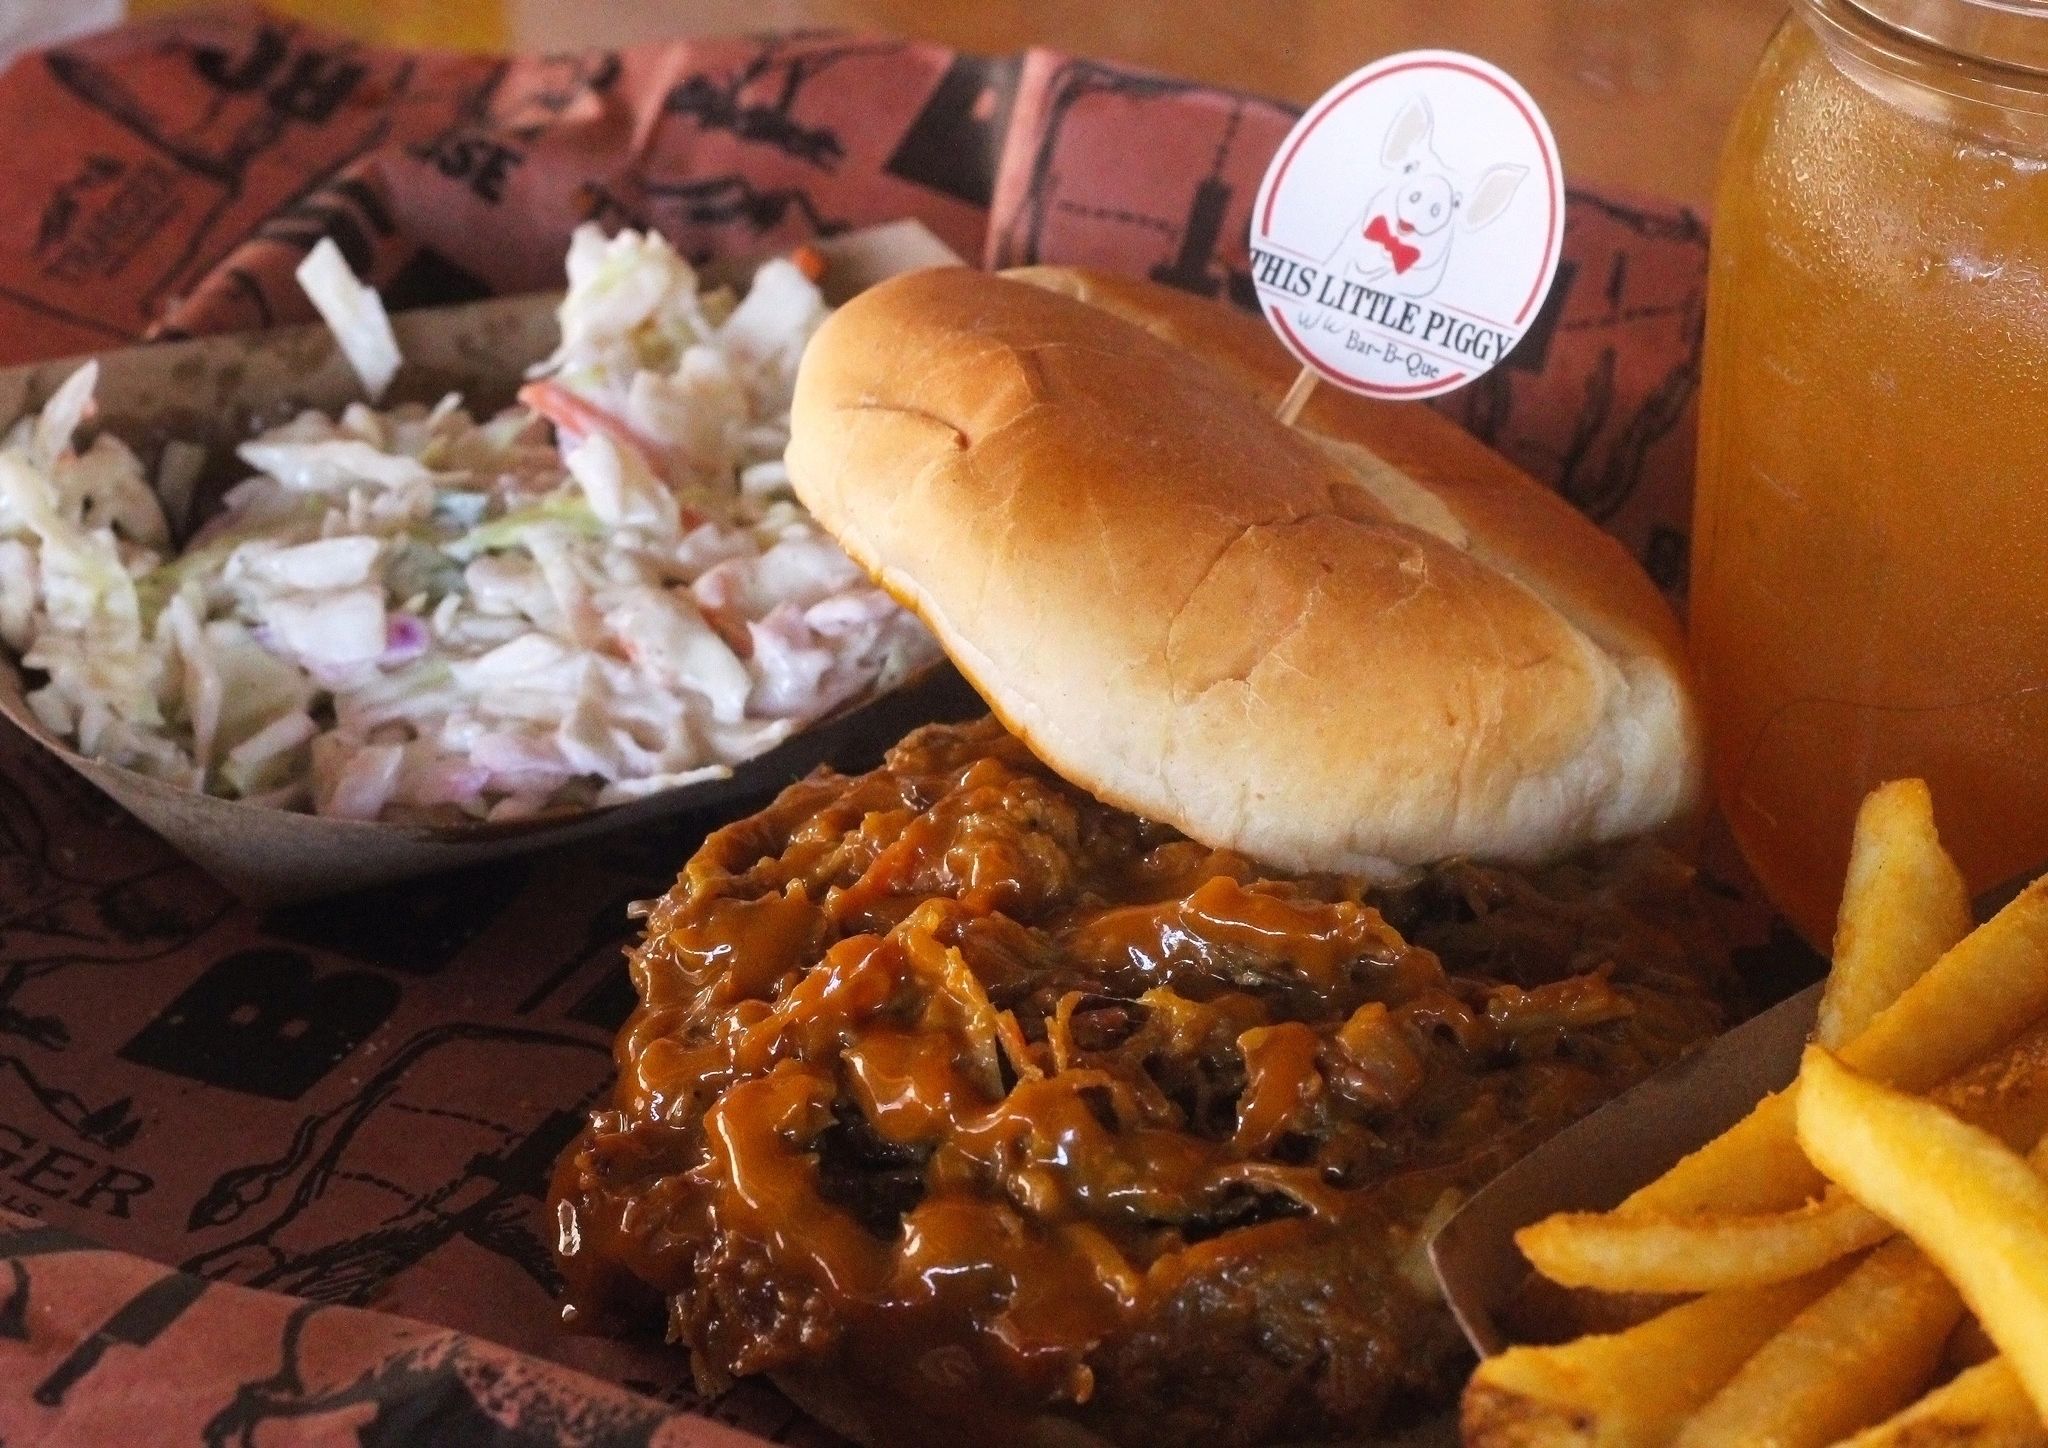 Our pulled pork sandwiches pack 1/2 lb. of meat. A full meal (or maybe two!).